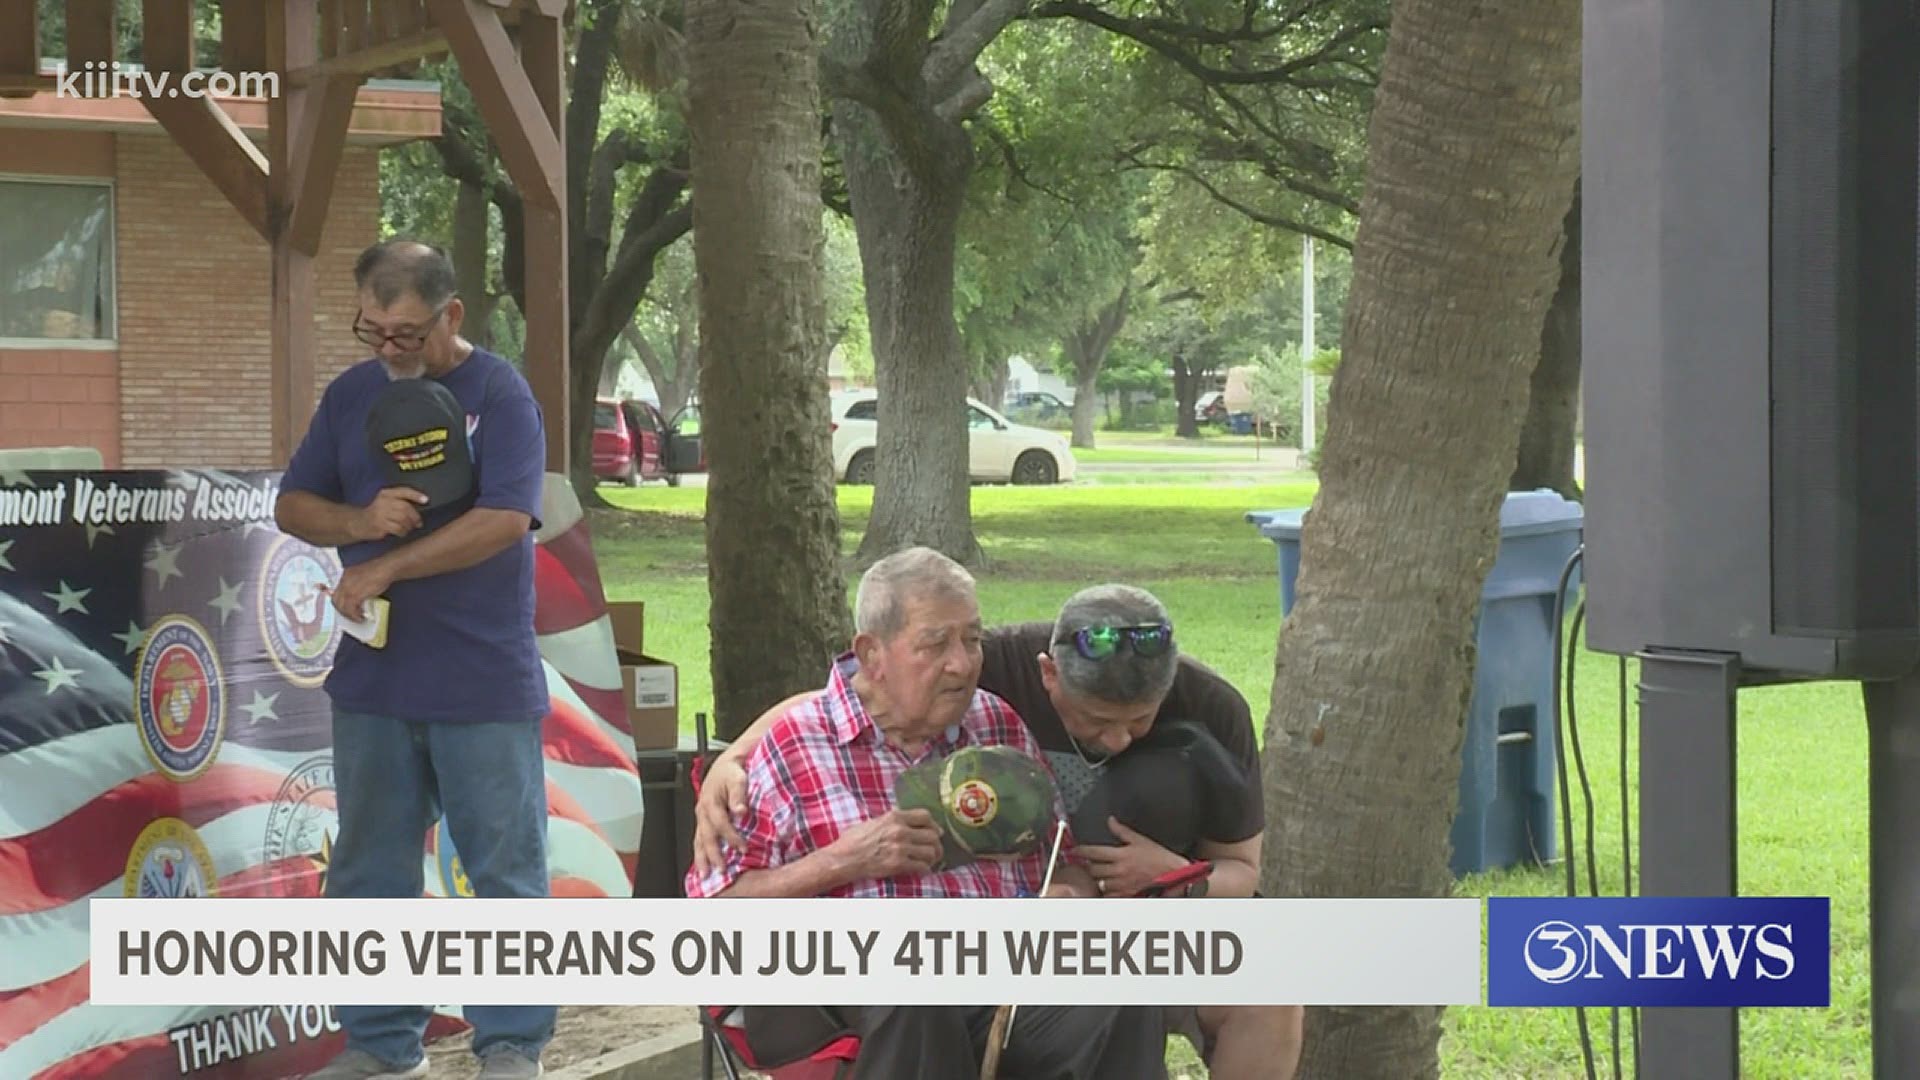 Residents in Premont gathered to recognize and celebrate local veterans with a parade and quilt of honor ceremony.